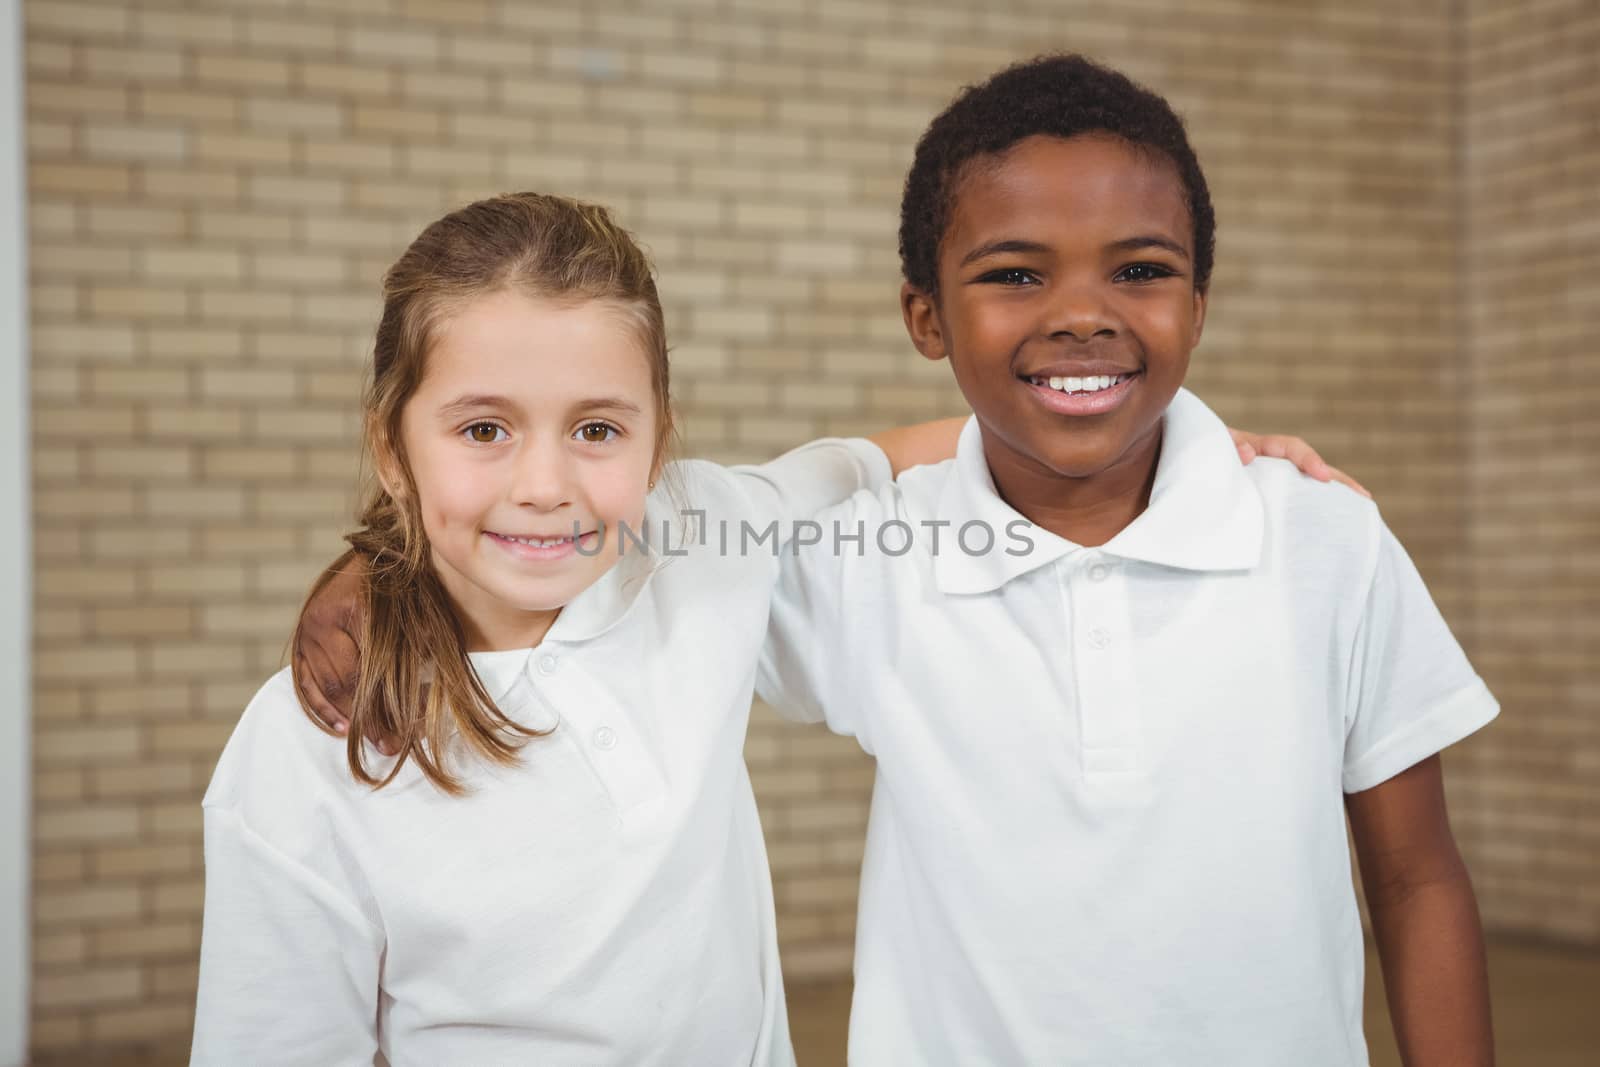 Pupils smiling with arms around each other in elementary school